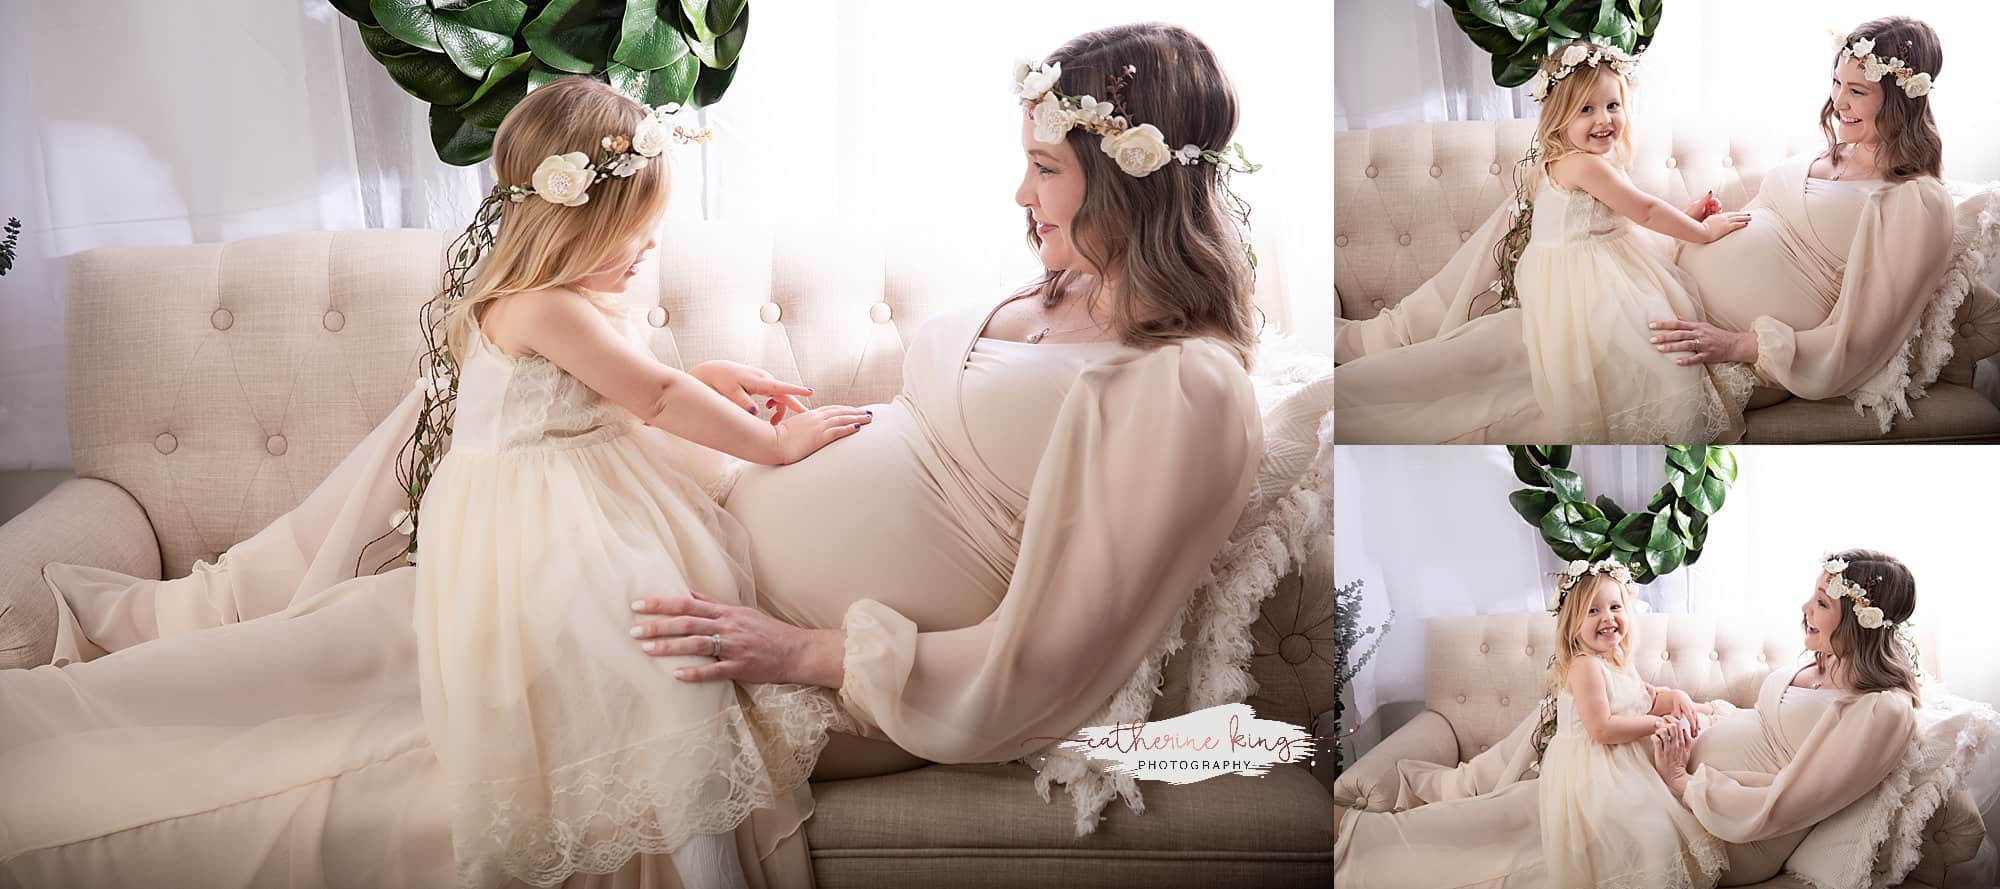 winter maternity photography in ct with catherine king photography a maternity photographer in ct